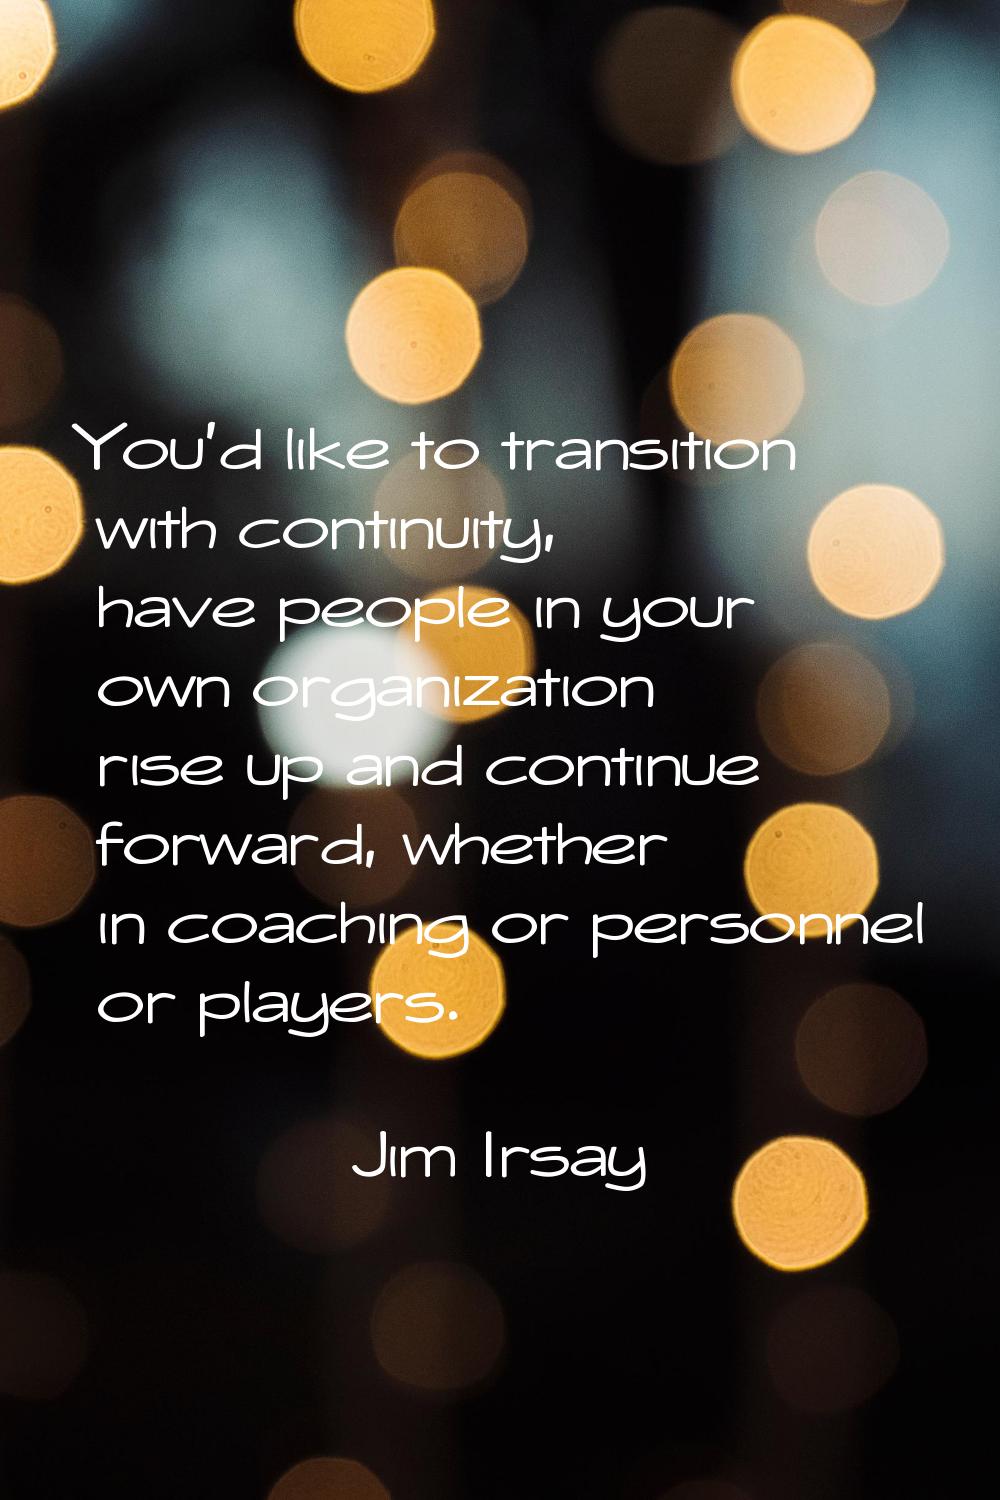 You'd like to transition with continuity, have people in your own organization rise up and continue